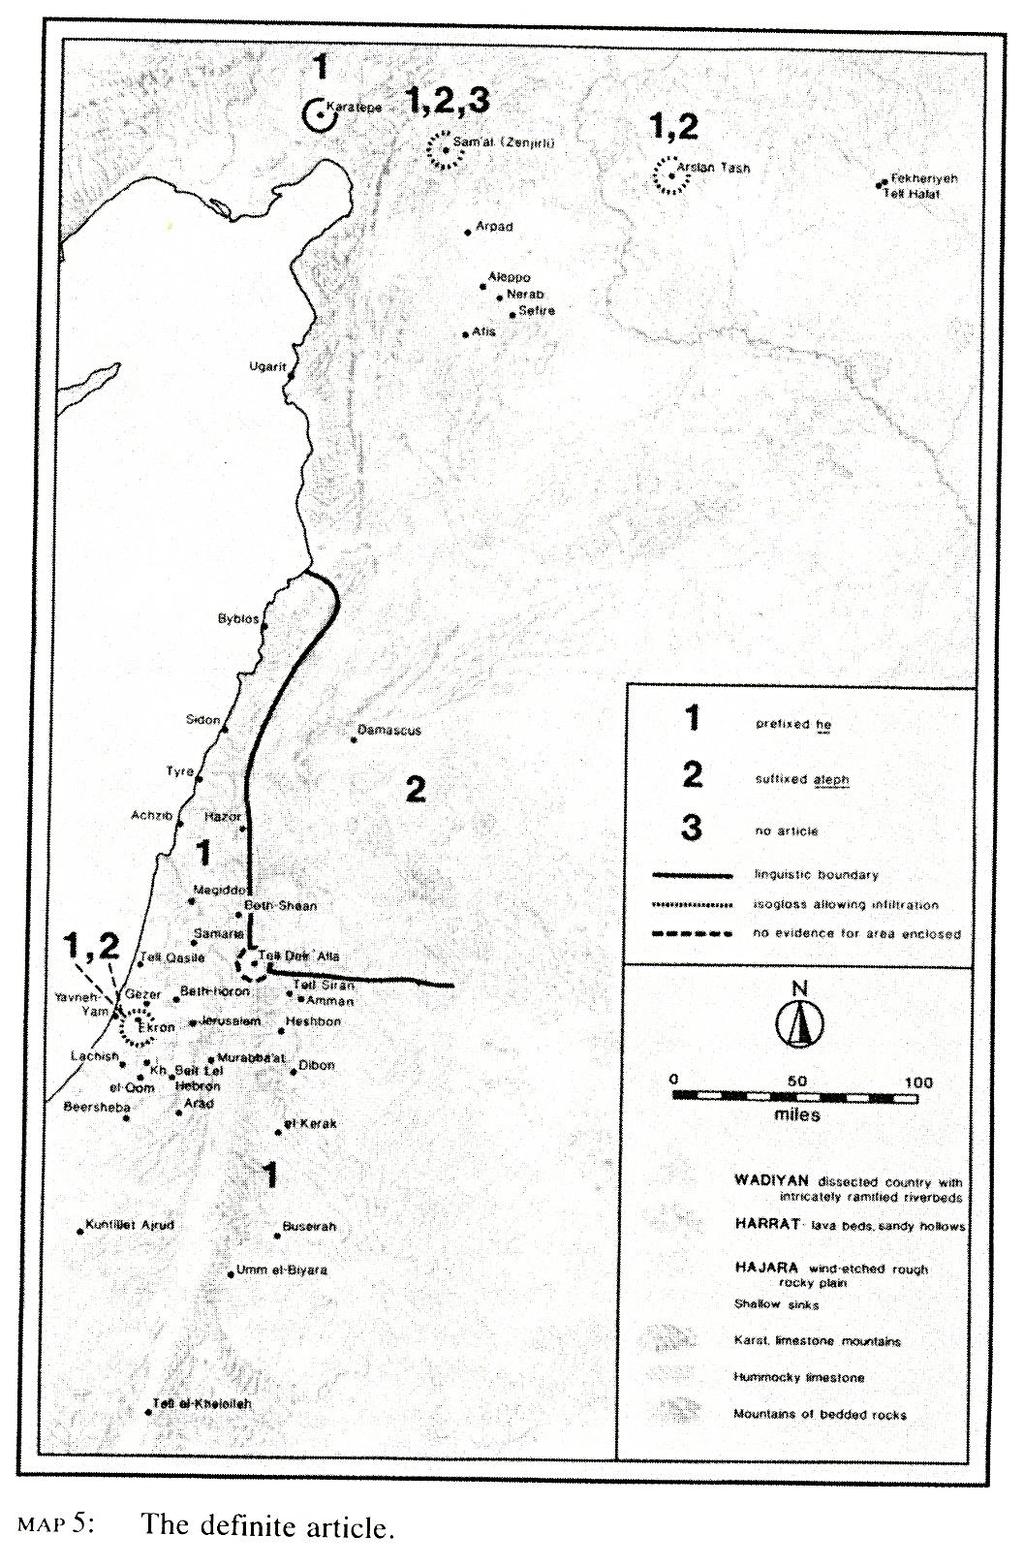 Garr, W. Randall. Dialect Geography of Syria-Palestine, 10